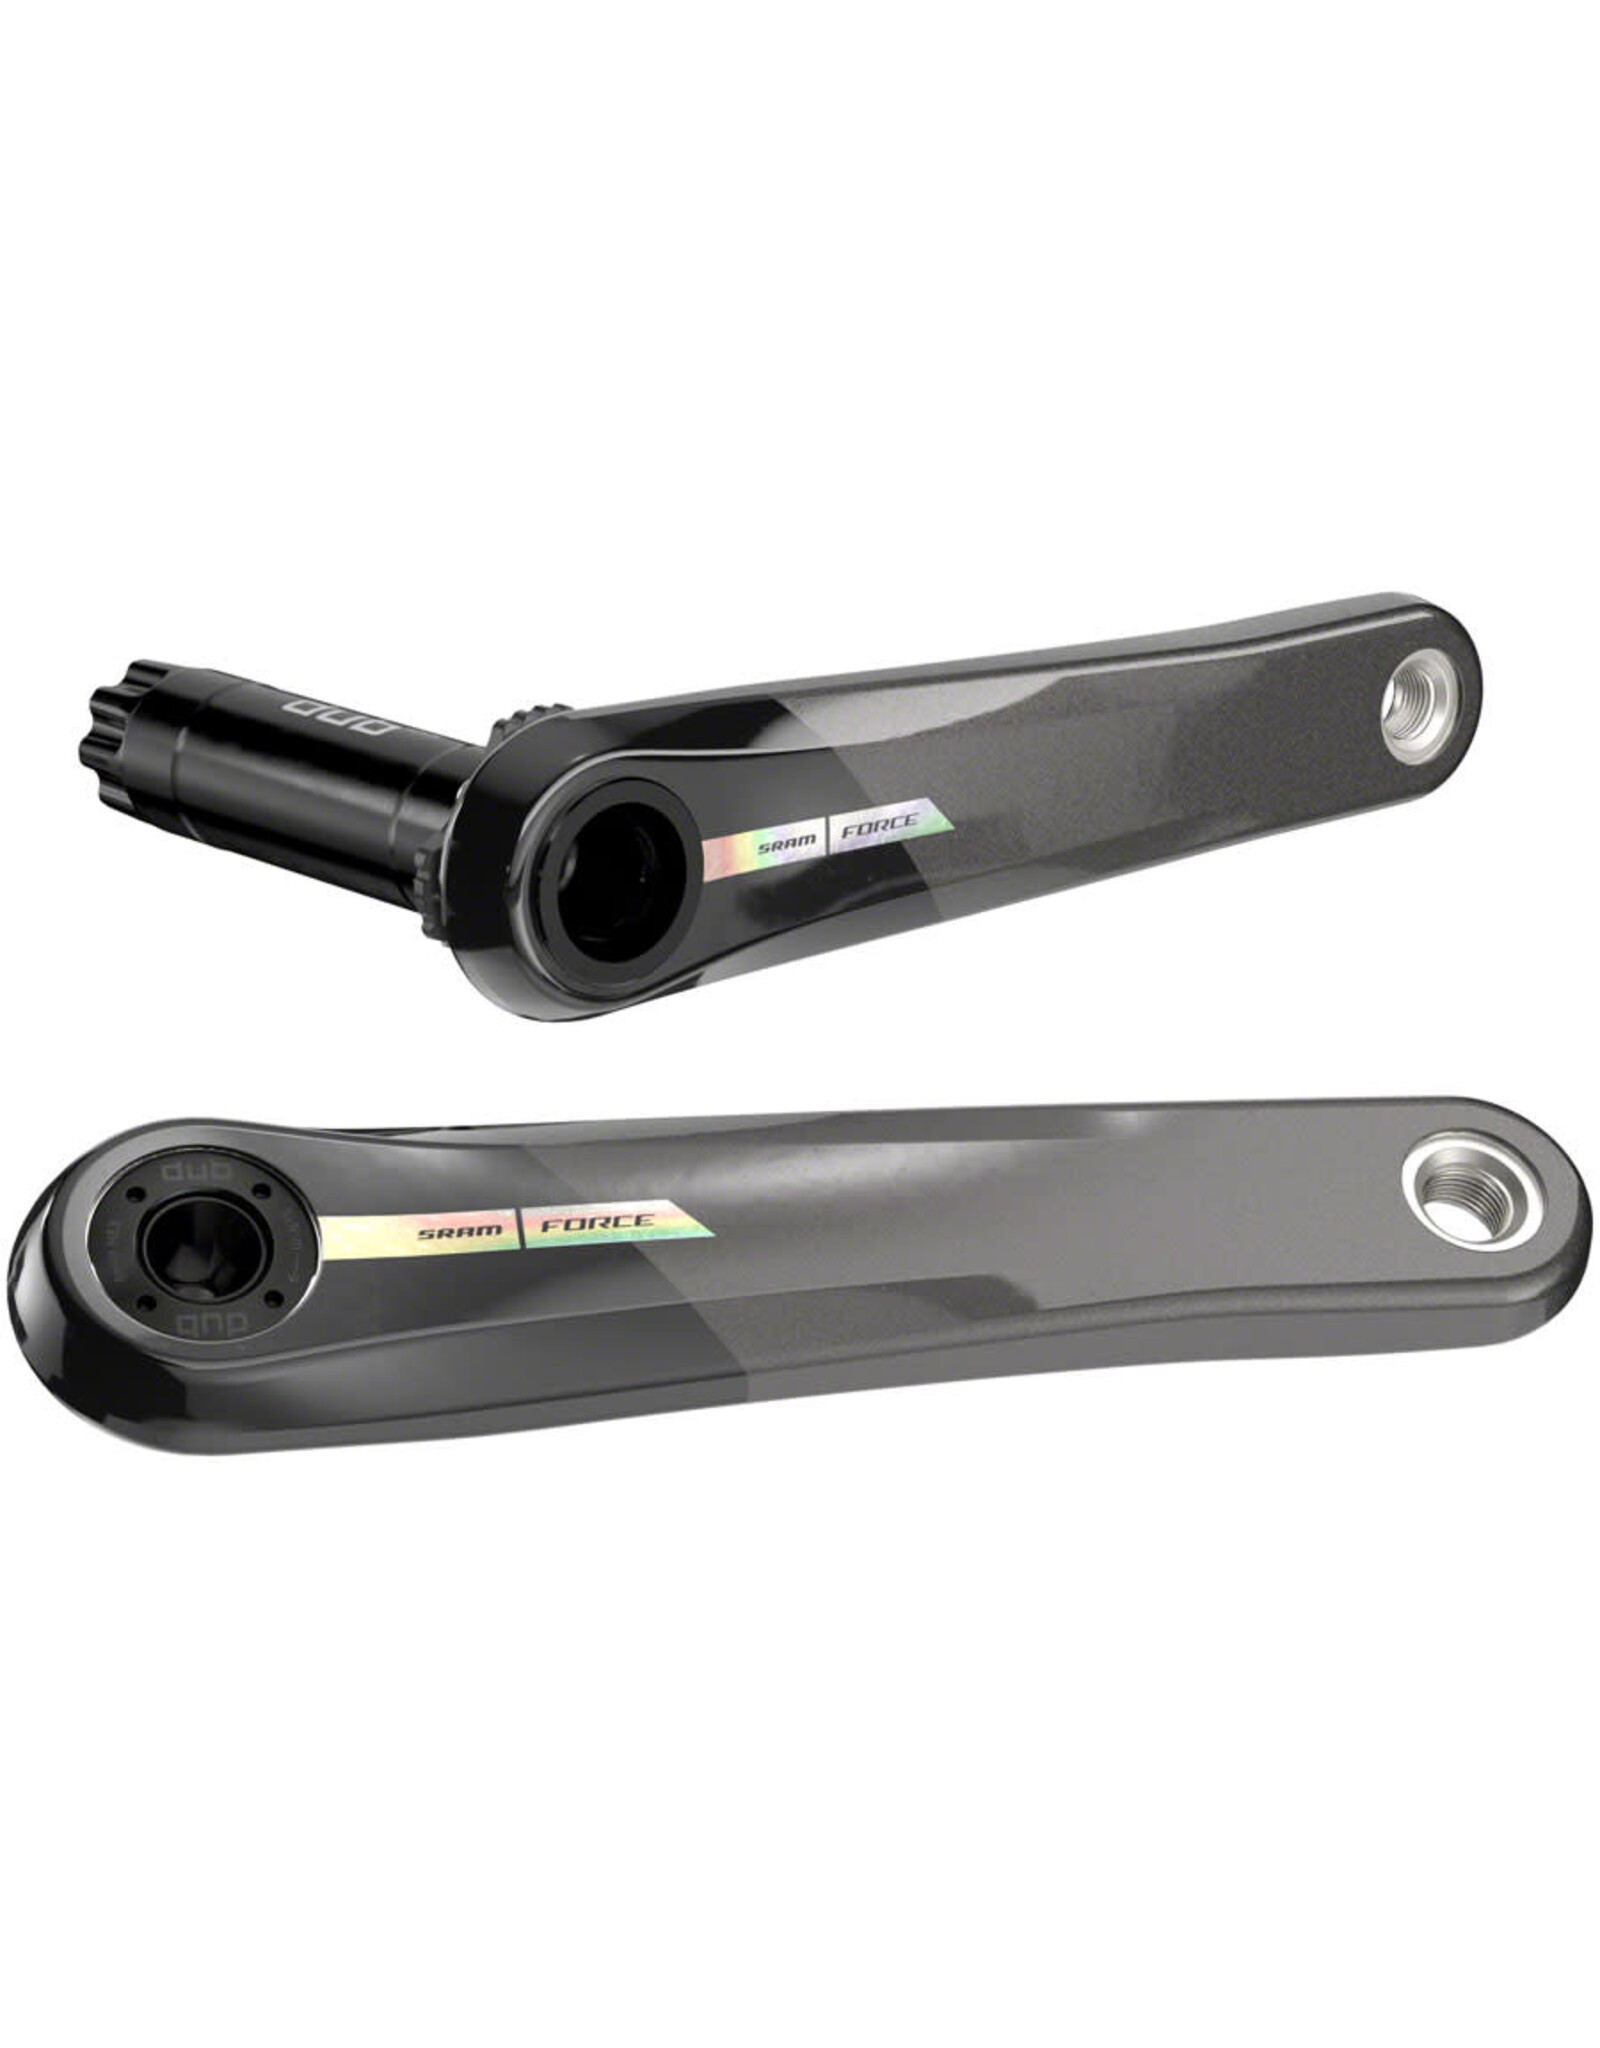 SRAM SRAM Force Wide Crank Arm Assembly - 170mm, 12-Speed, 8-Bolt Direct Mount, DUB Spindle Interface, Iridescent Gray, D2